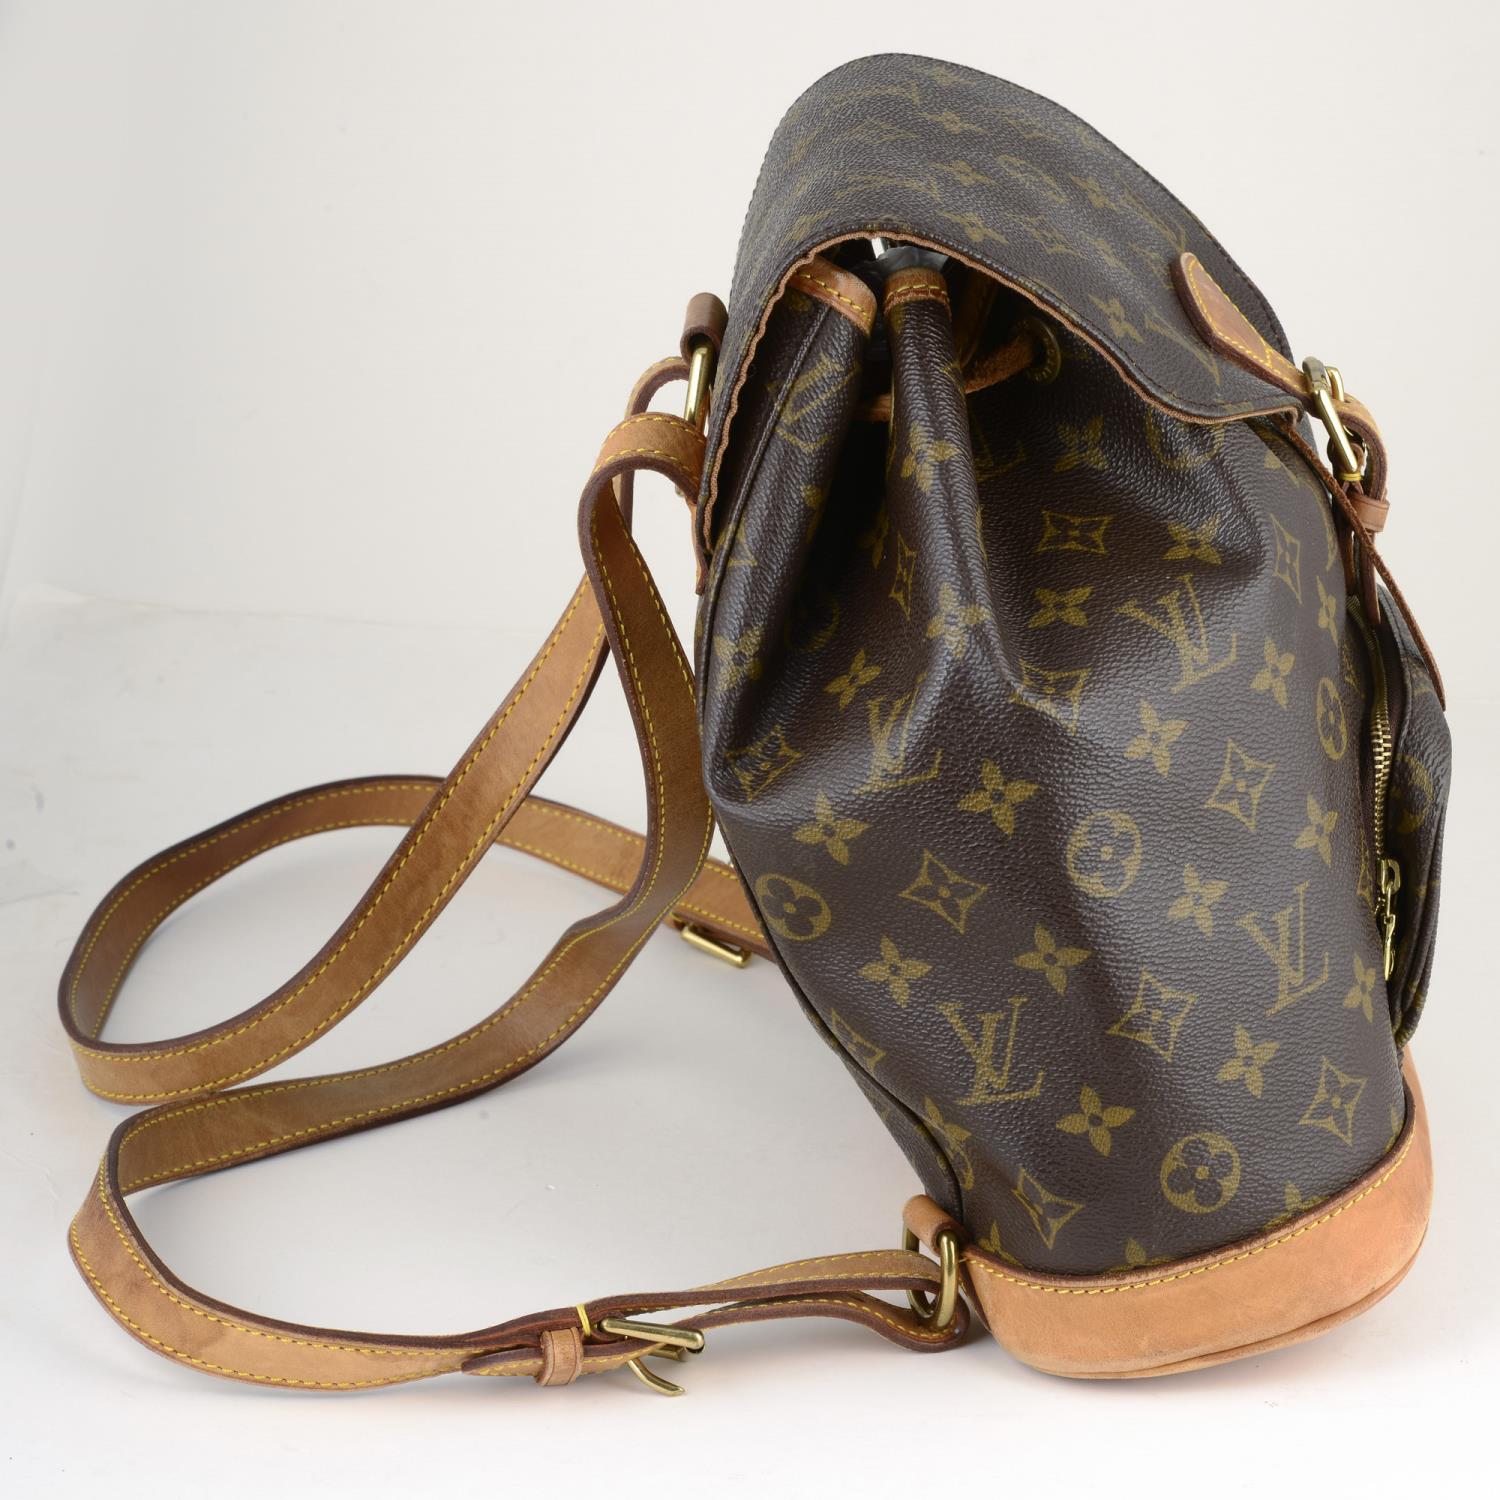 LOUIS VUITTON - a Monogram Montsouris MM backpack. - Image 2 of 6